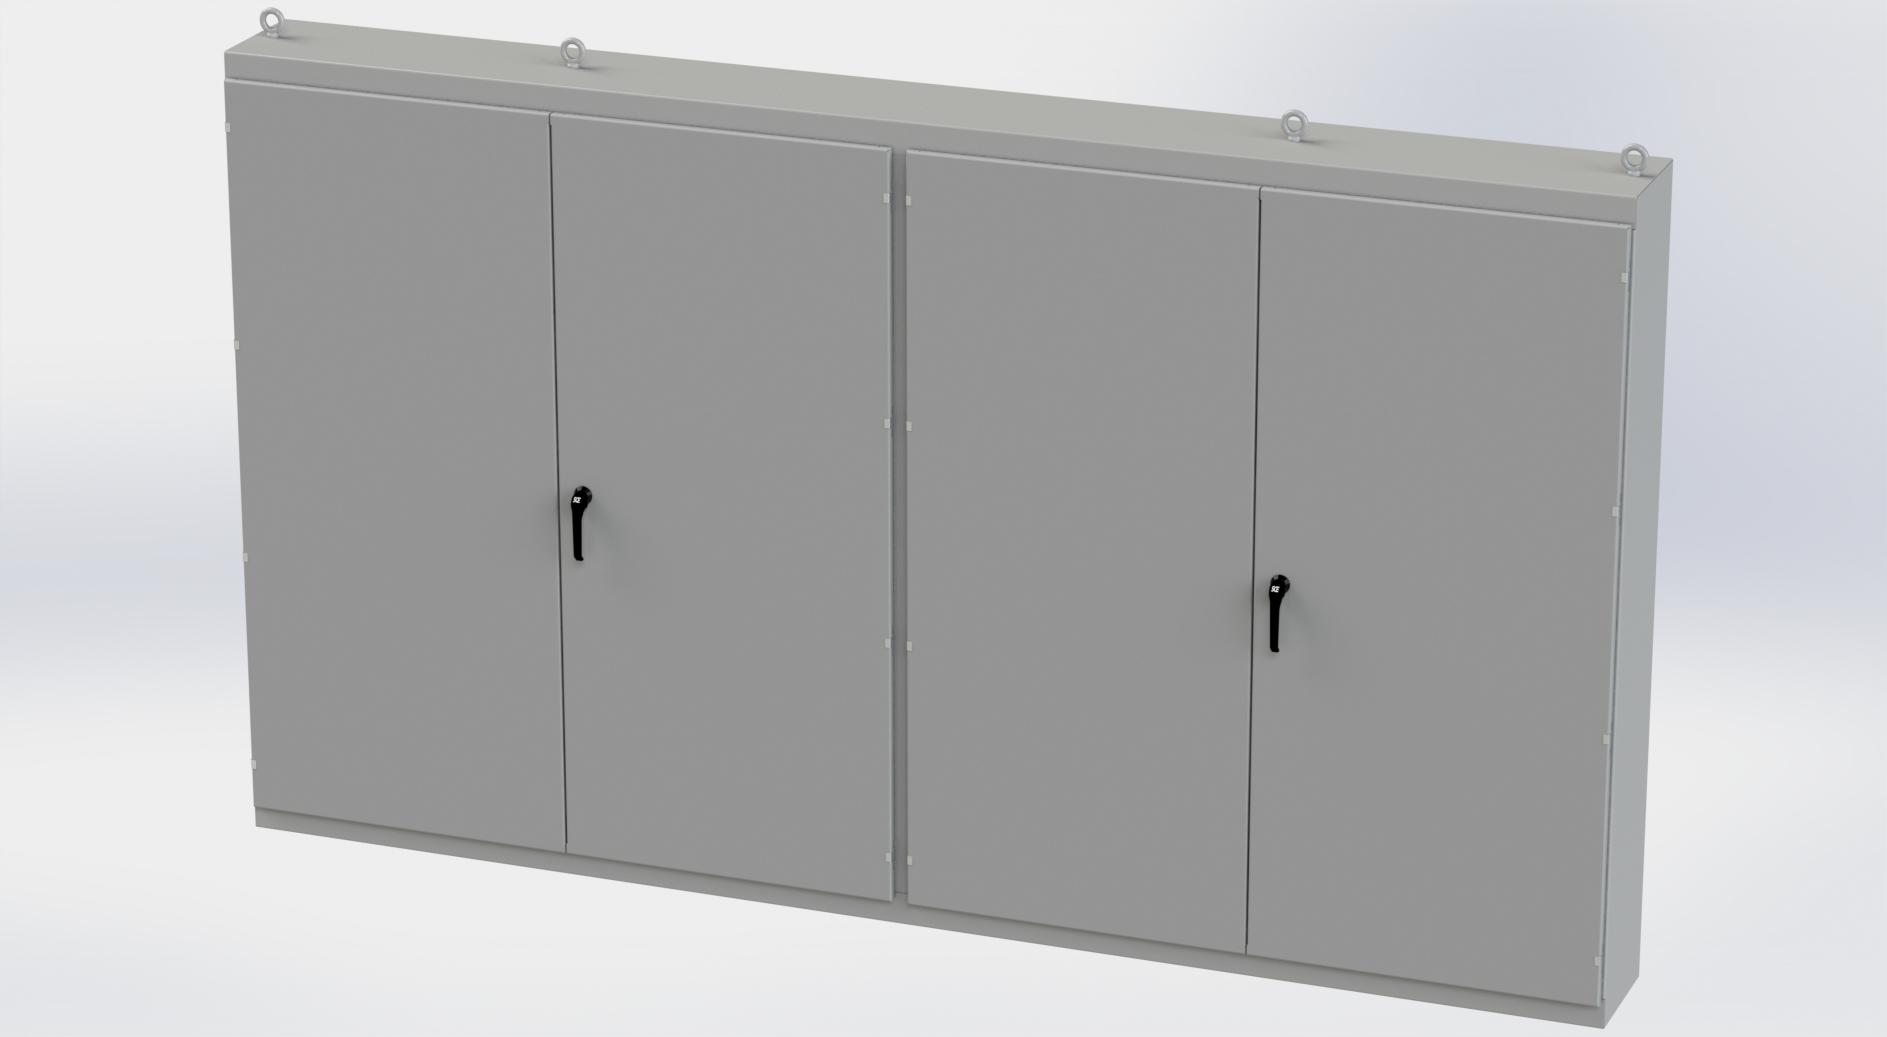 Saginaw Control SCE-86M4E Enclosure, Multi-Door, Height:86.00", Width:149.00", Depth:14.00", ANSI-61 gray powder coating inside and out. Sub-panels are powder coated white.